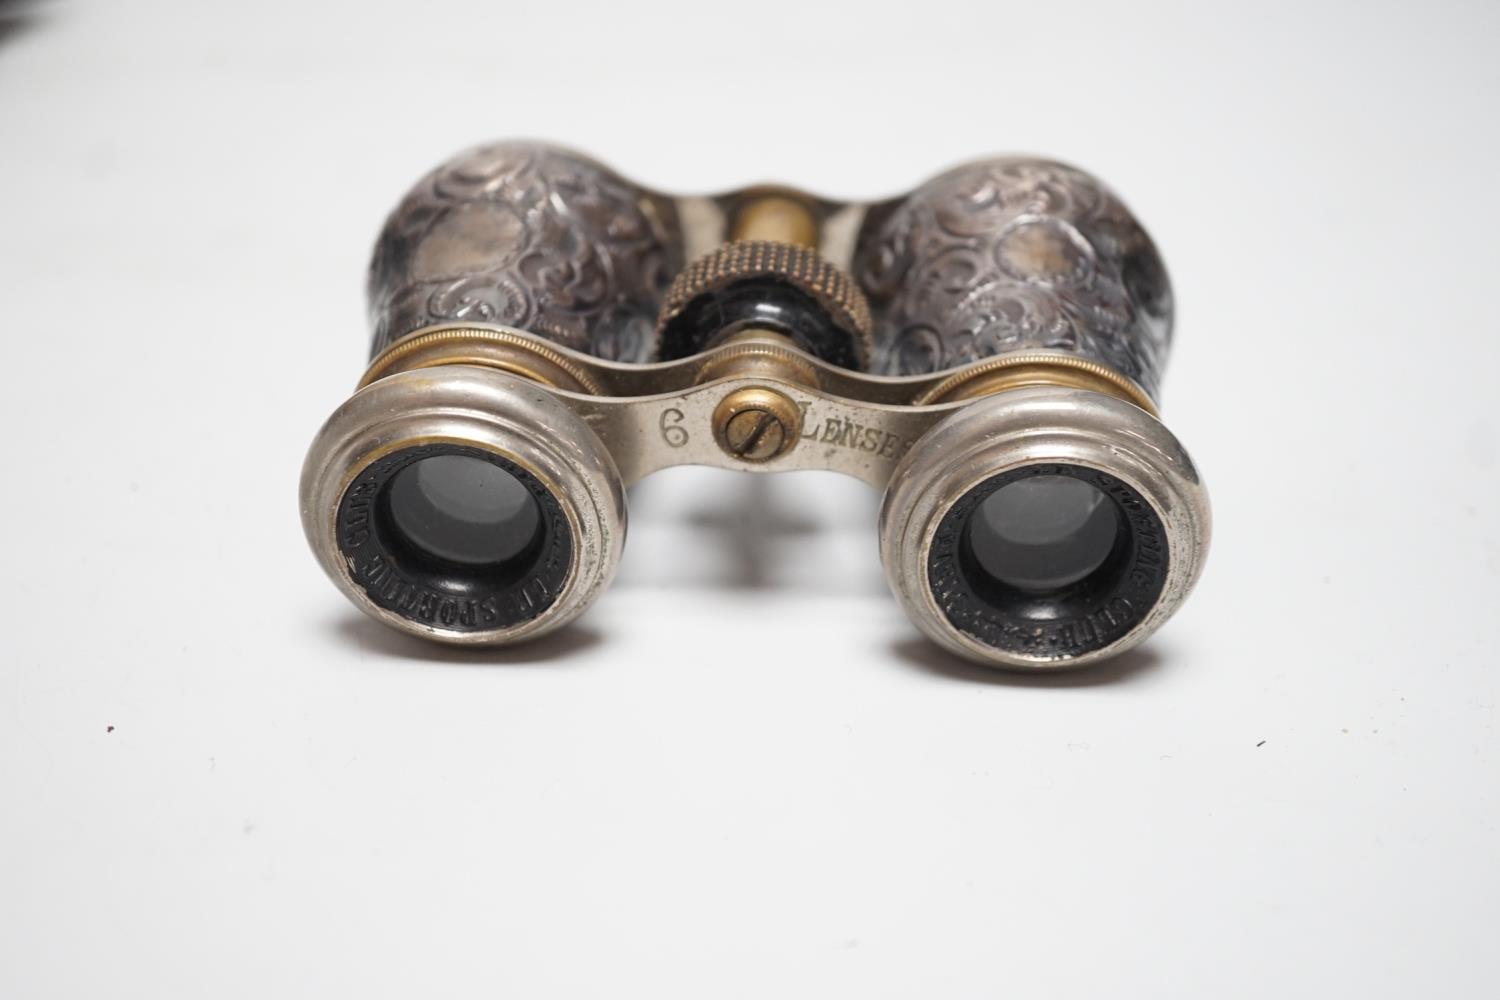 A pair of late Victorian repousse silver mounted brass opera glasses, Birmingham, 1900, (cased) - Image 4 of 4